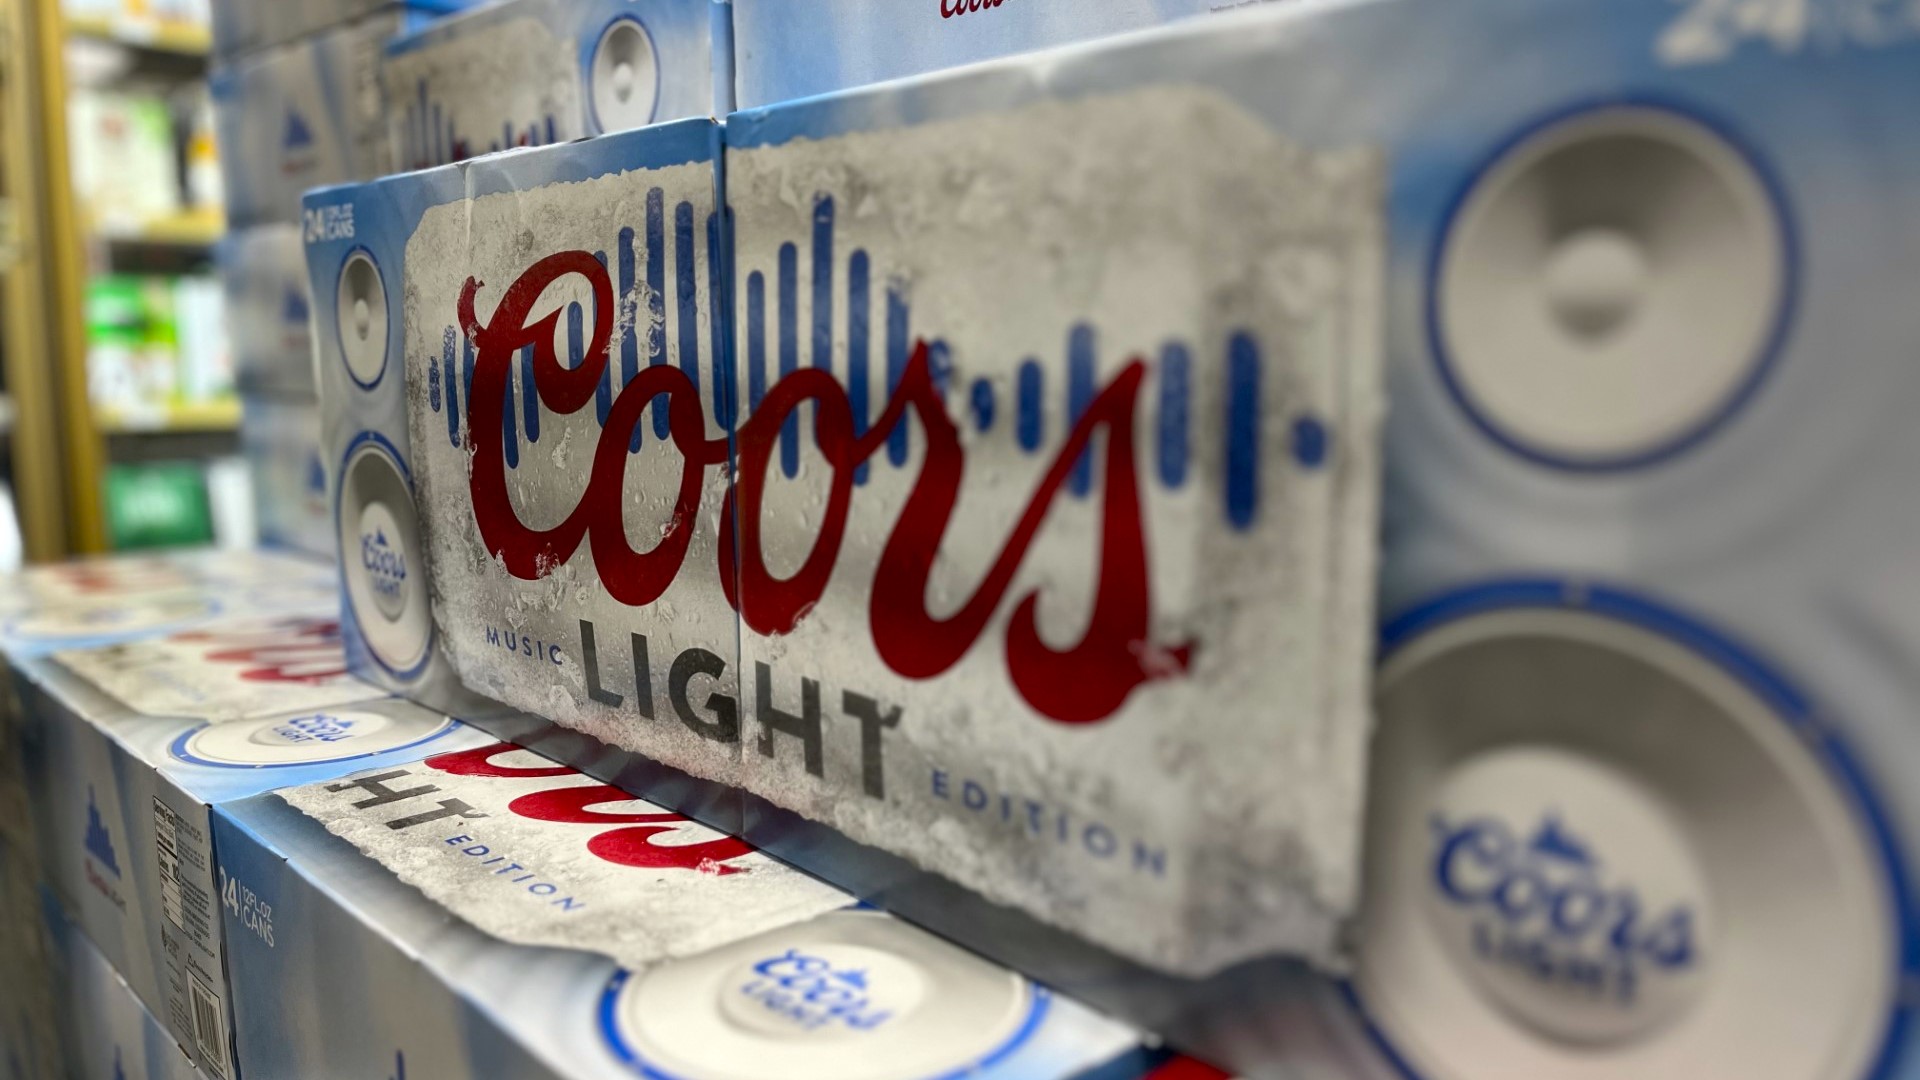 Coors Light's Chill Amplified packaging